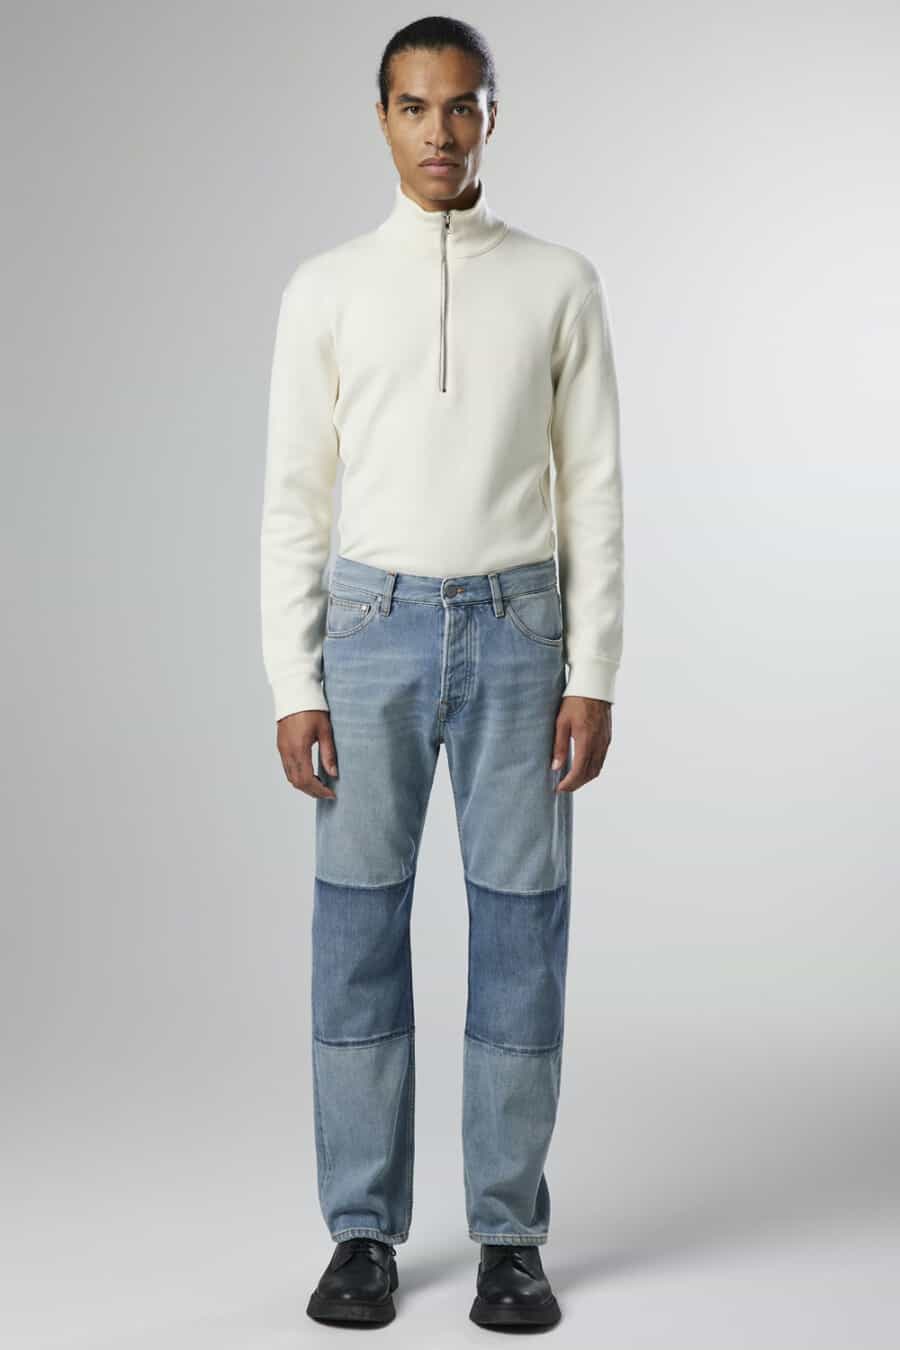 Men's workwear jeans, white funnel neck sweater and black shoes outfit